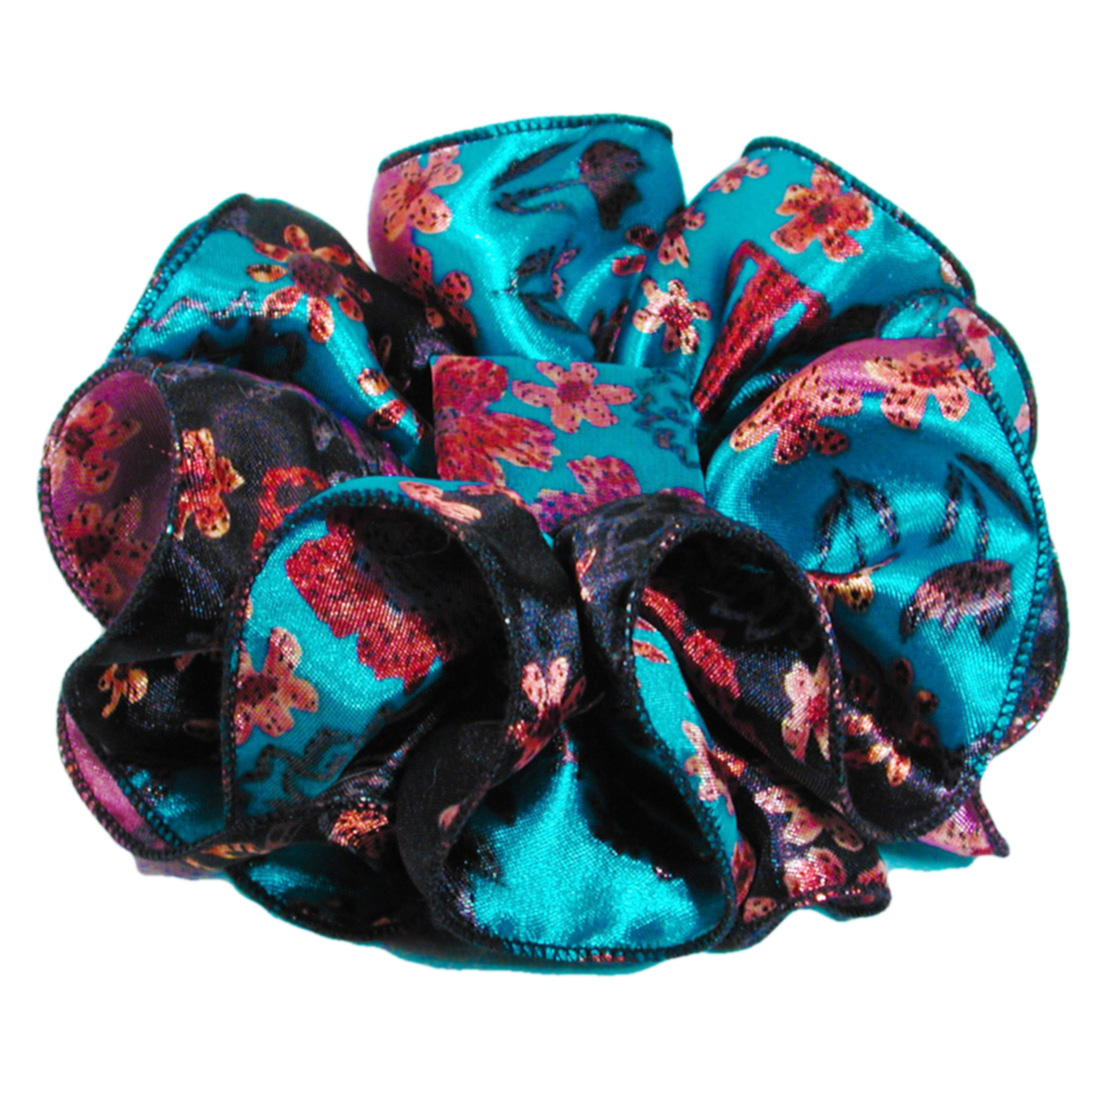 Turquoise Black and Mauve Flower Print Ruffled Hair Bow, a fashion accessorie - Evening Elegance